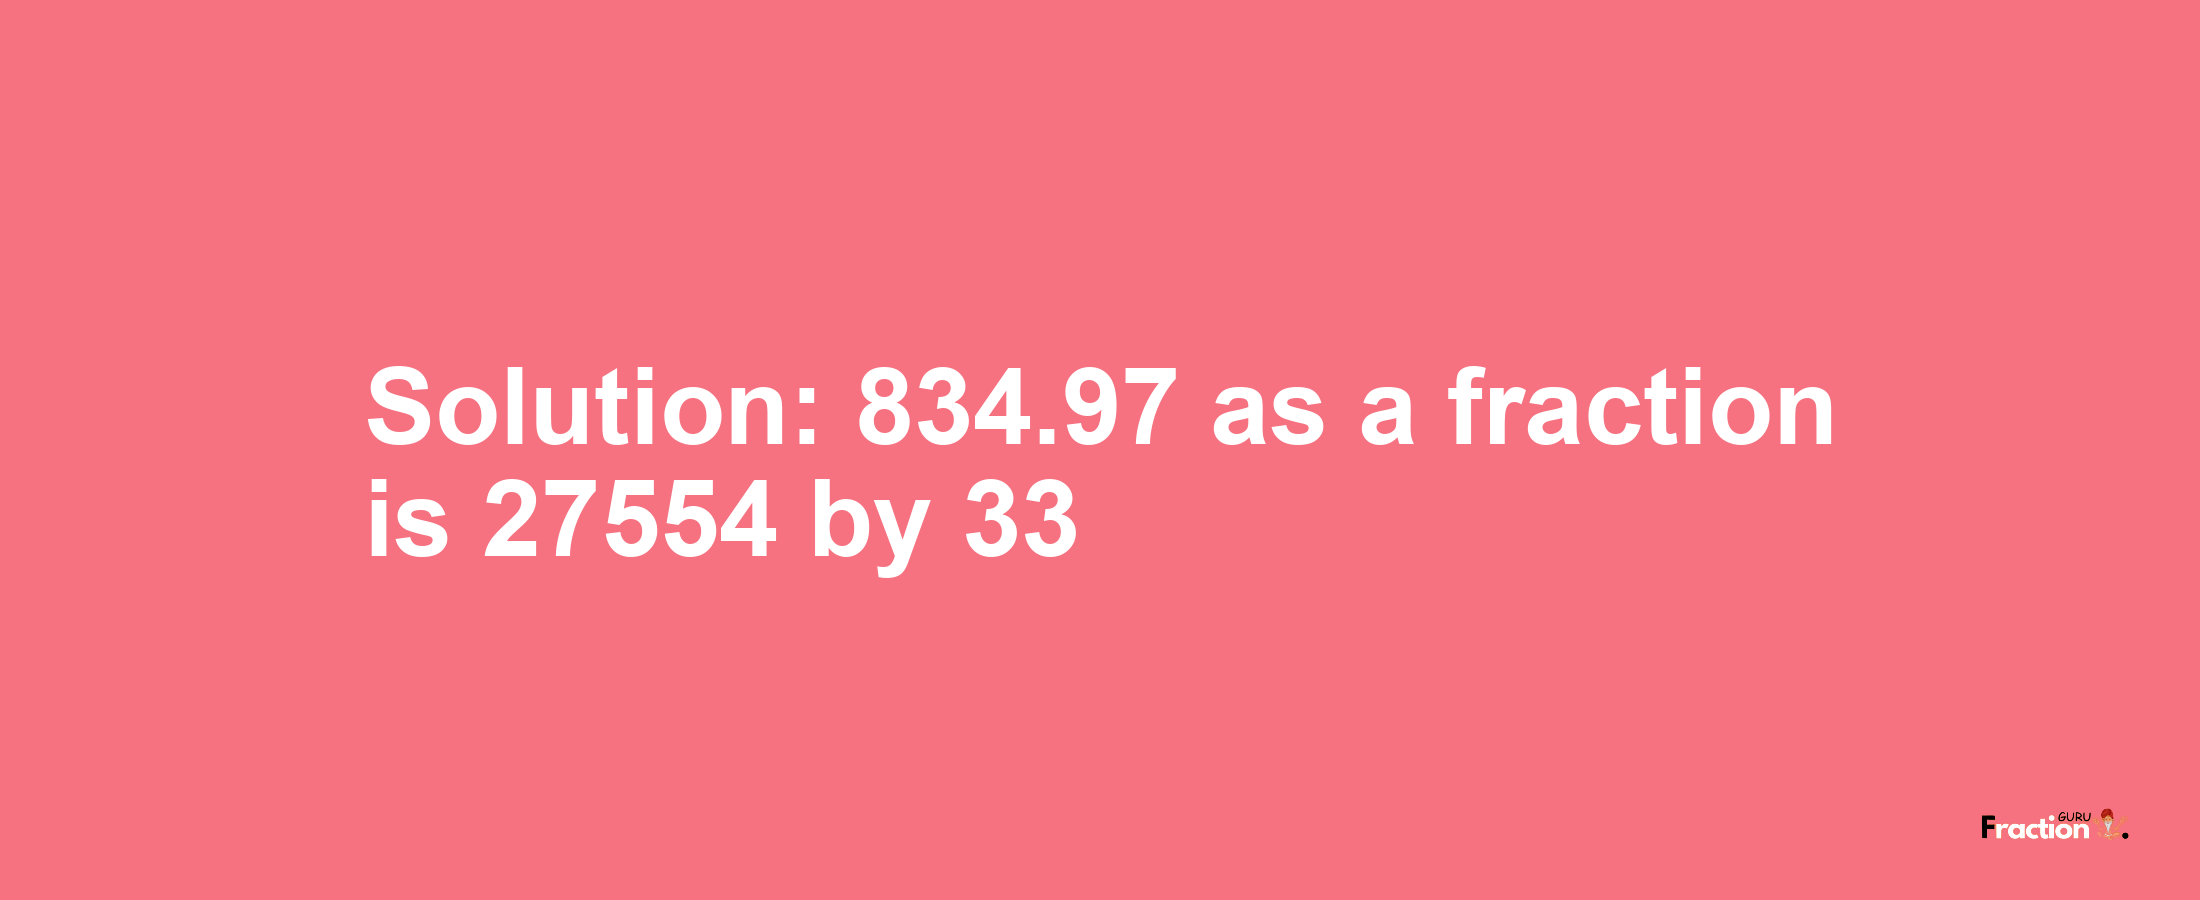 Solution:834.97 as a fraction is 27554/33